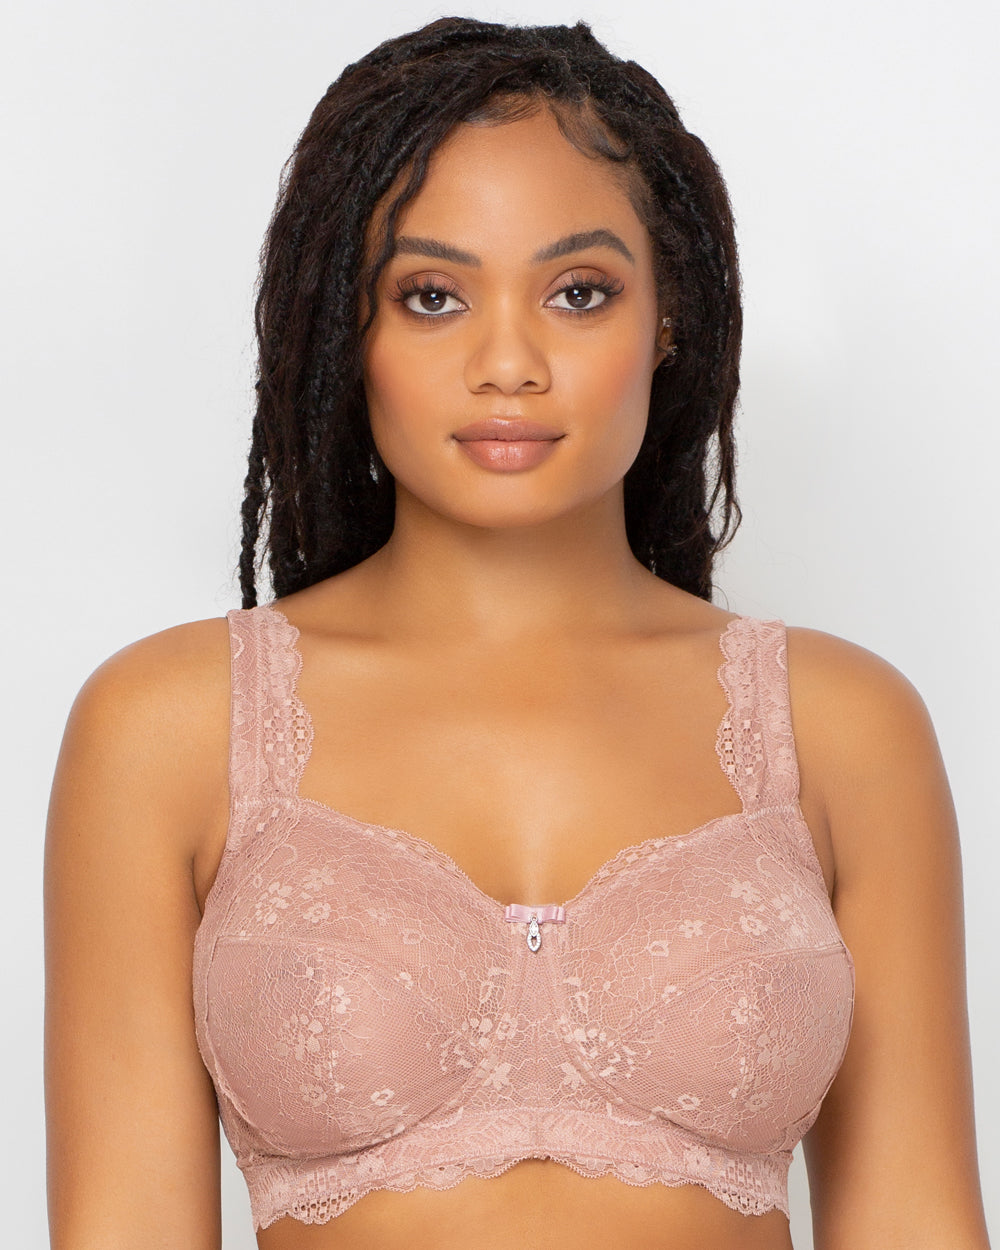 Women's Lace Full Coverage Wireless Bra Unlined Non-padded Plus